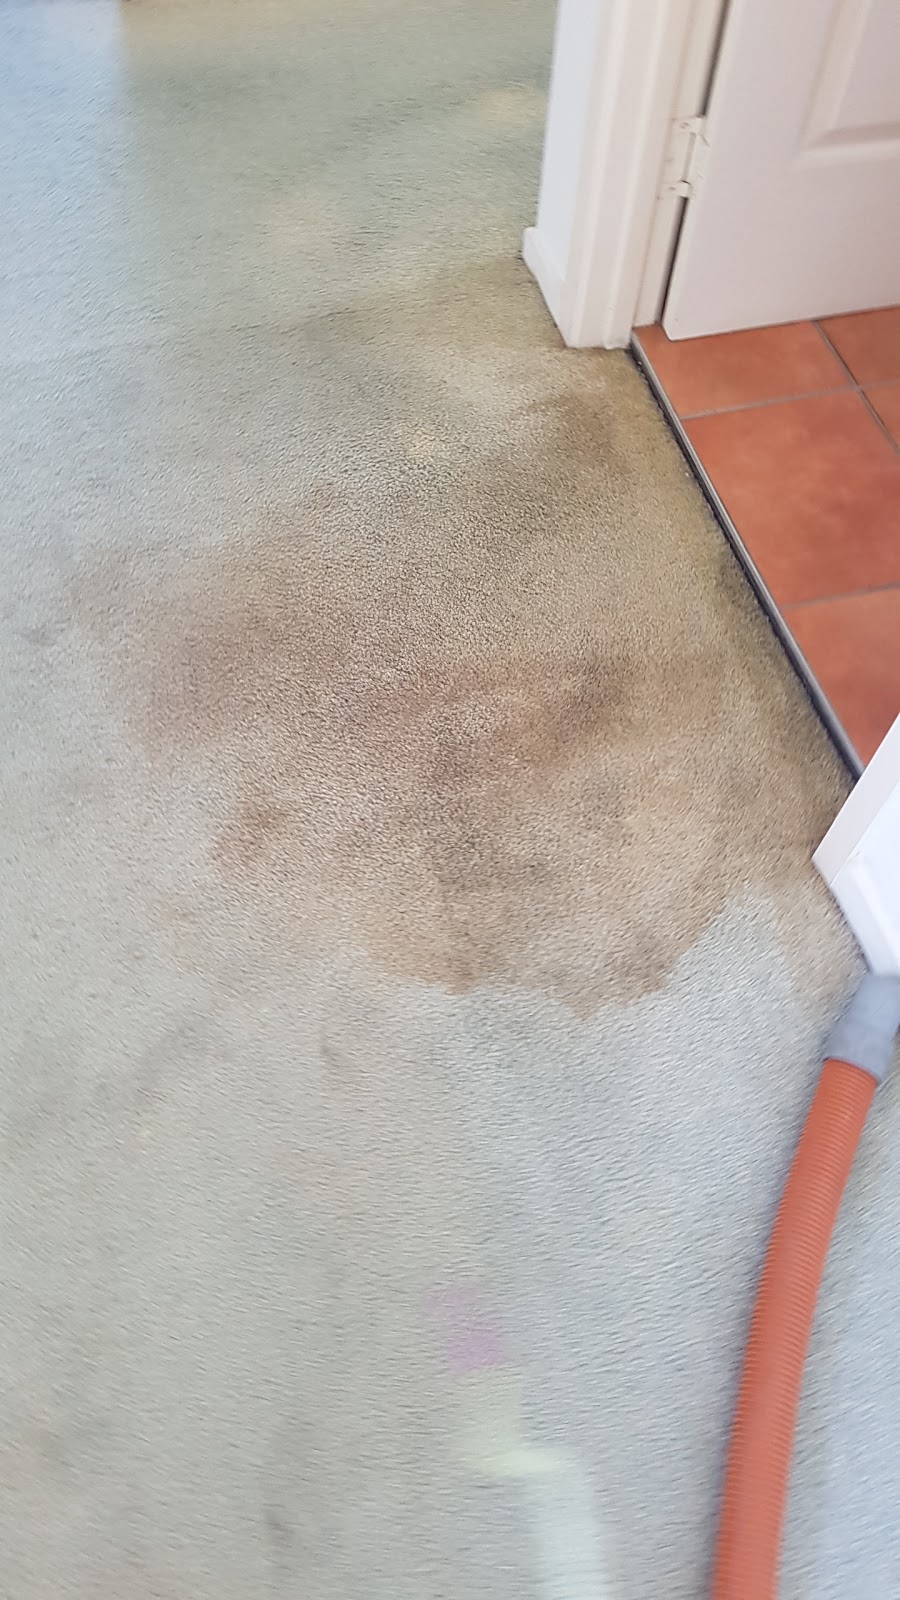 Protech Carpet Cleaning | laundry | 4 The Esplanade, Burleigh Heads QLD 4220, Australia | 0404008318 OR +61 404 008 318